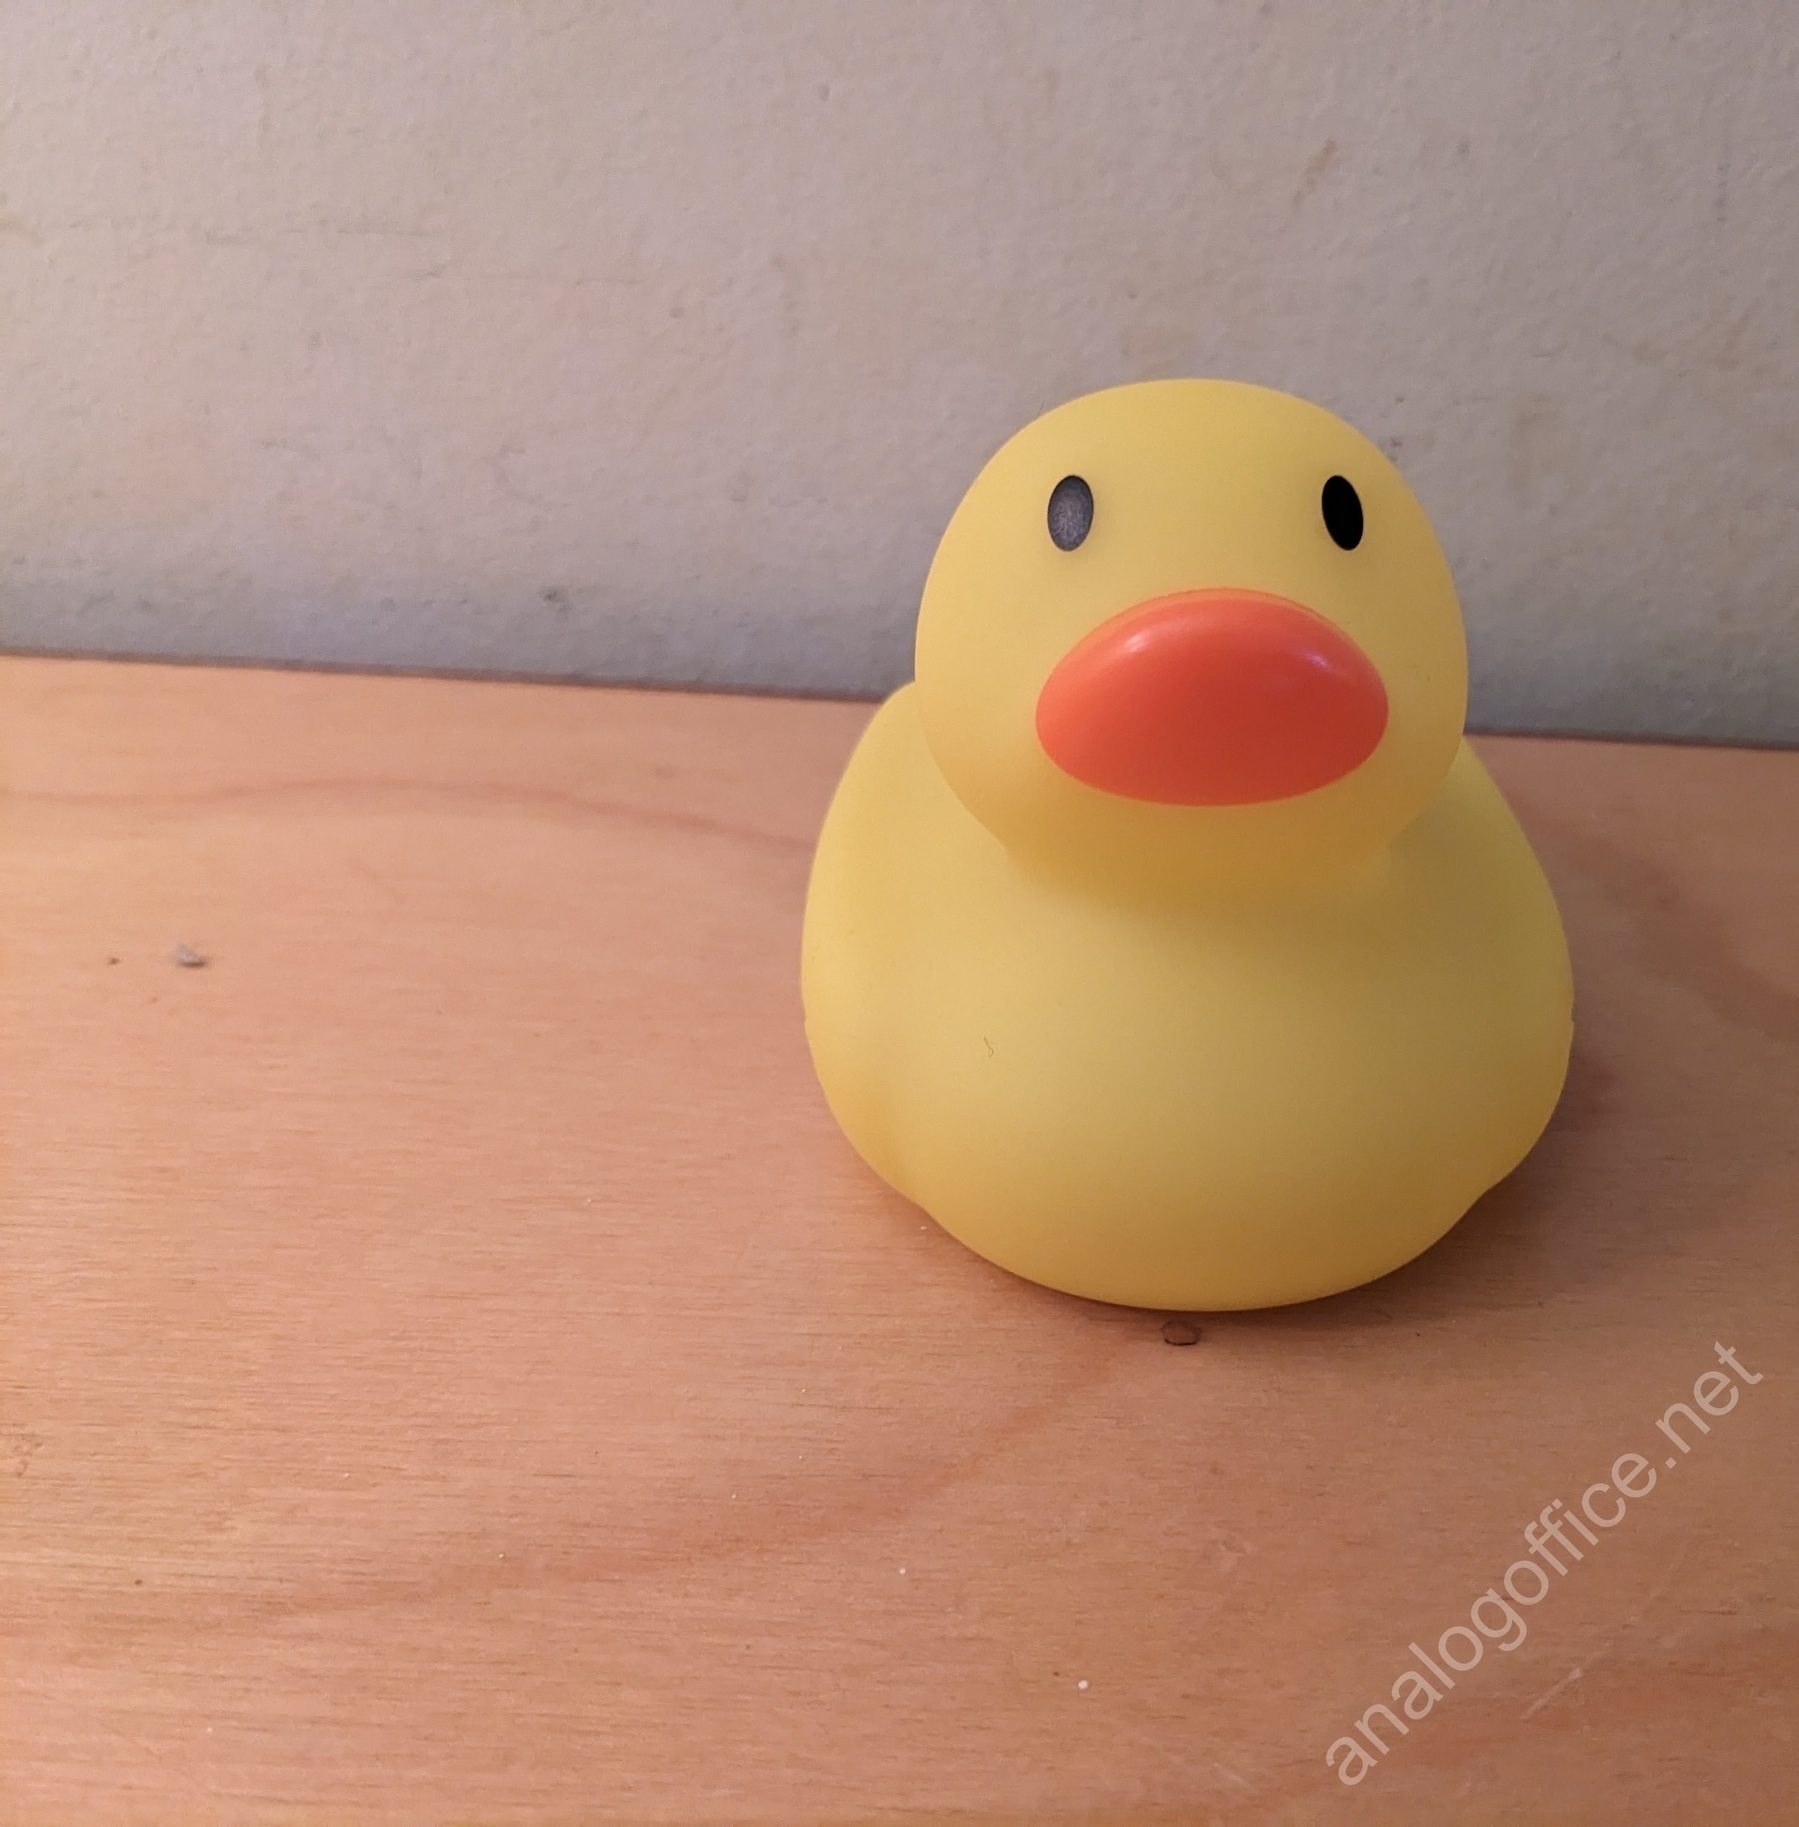 small rubber duck bath toy placed on a shelf